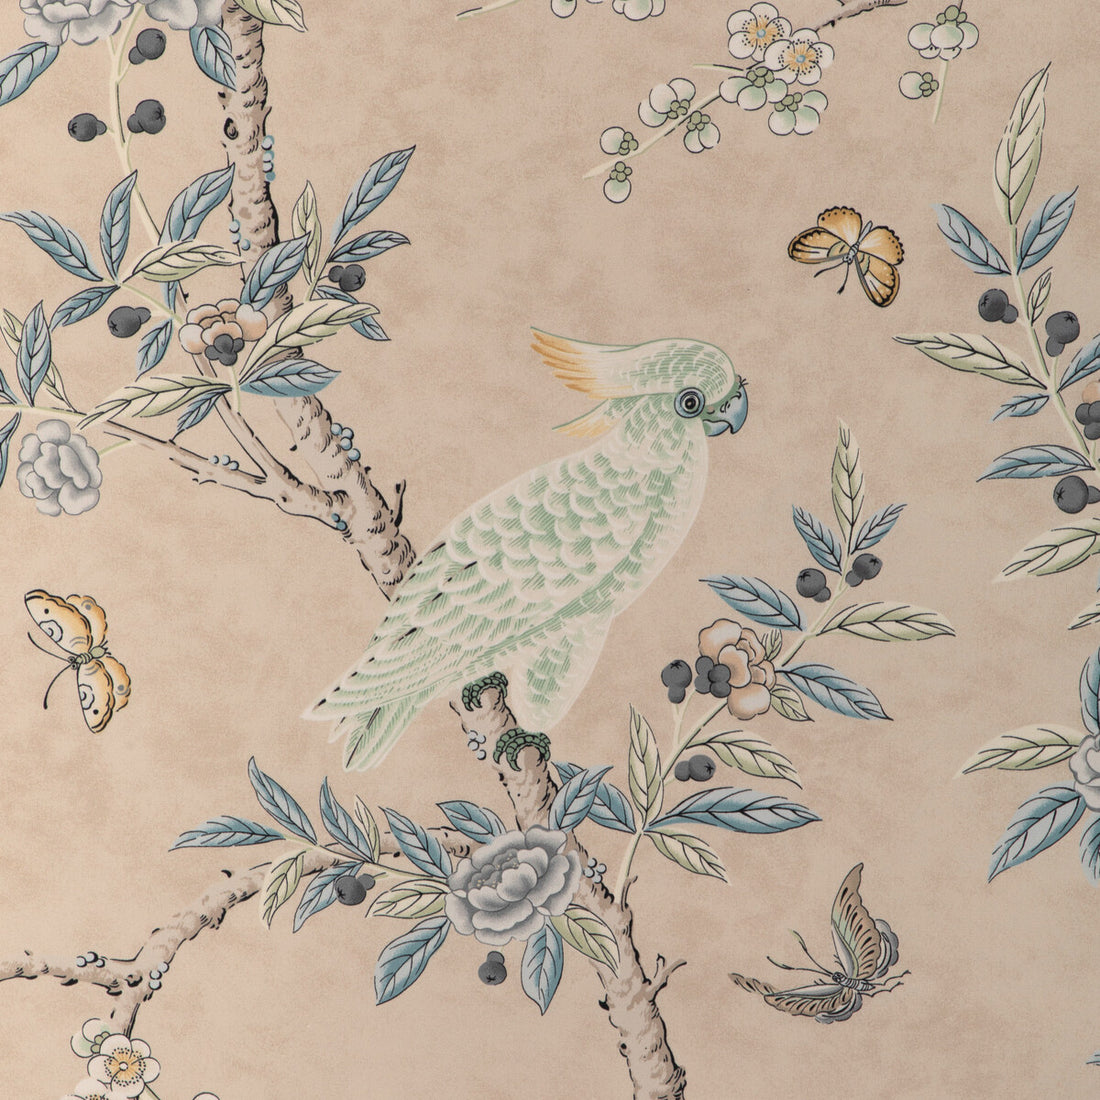 Kanchou Print fabric in sand color - pattern 8024106.1615.0 - by Brunschwig &amp; Fils in the La Menagerie collection